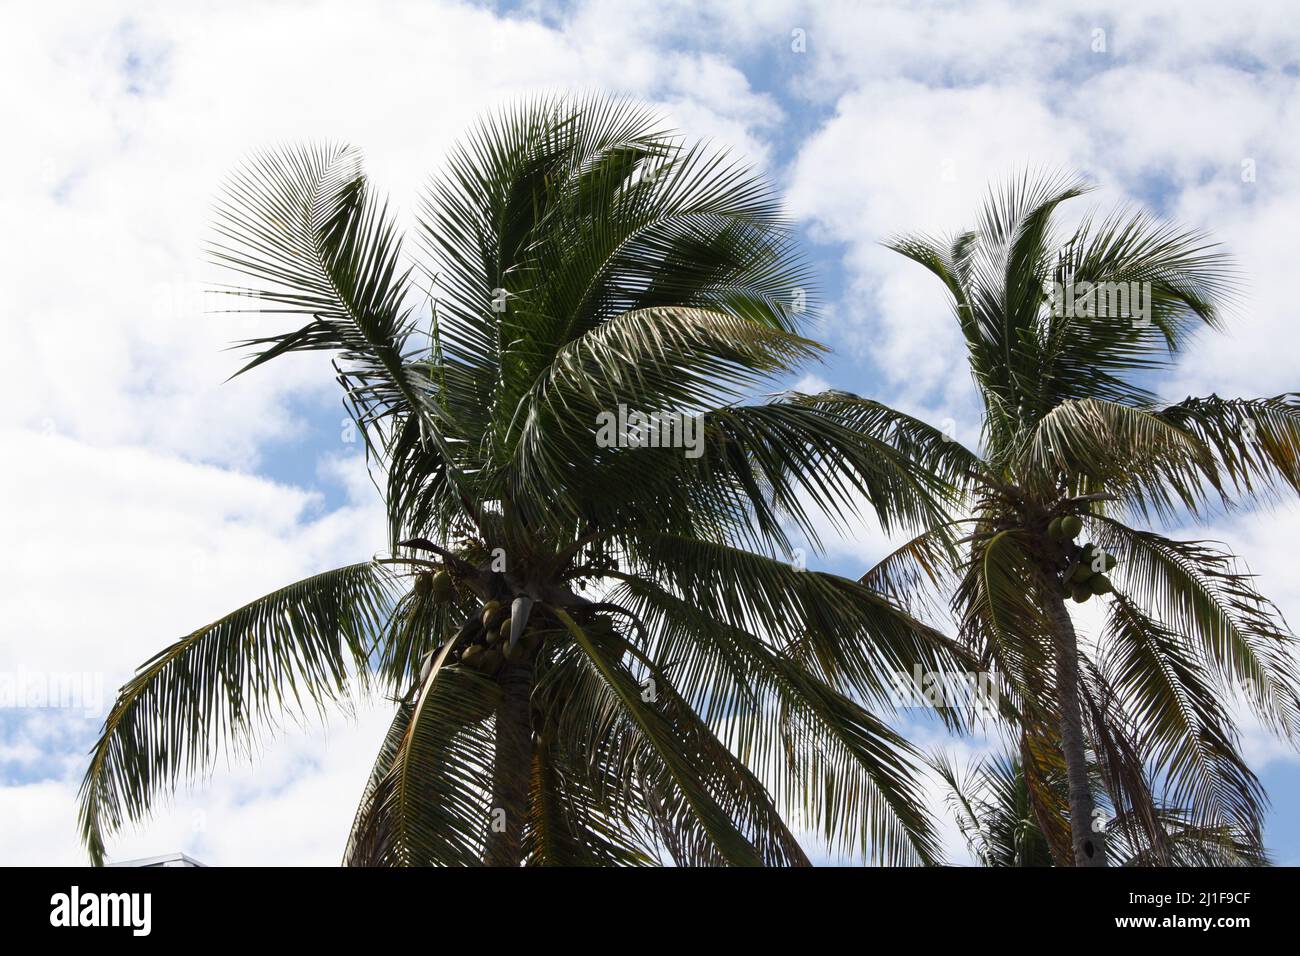 Coconut trees against a cloudy sky Stock Photo